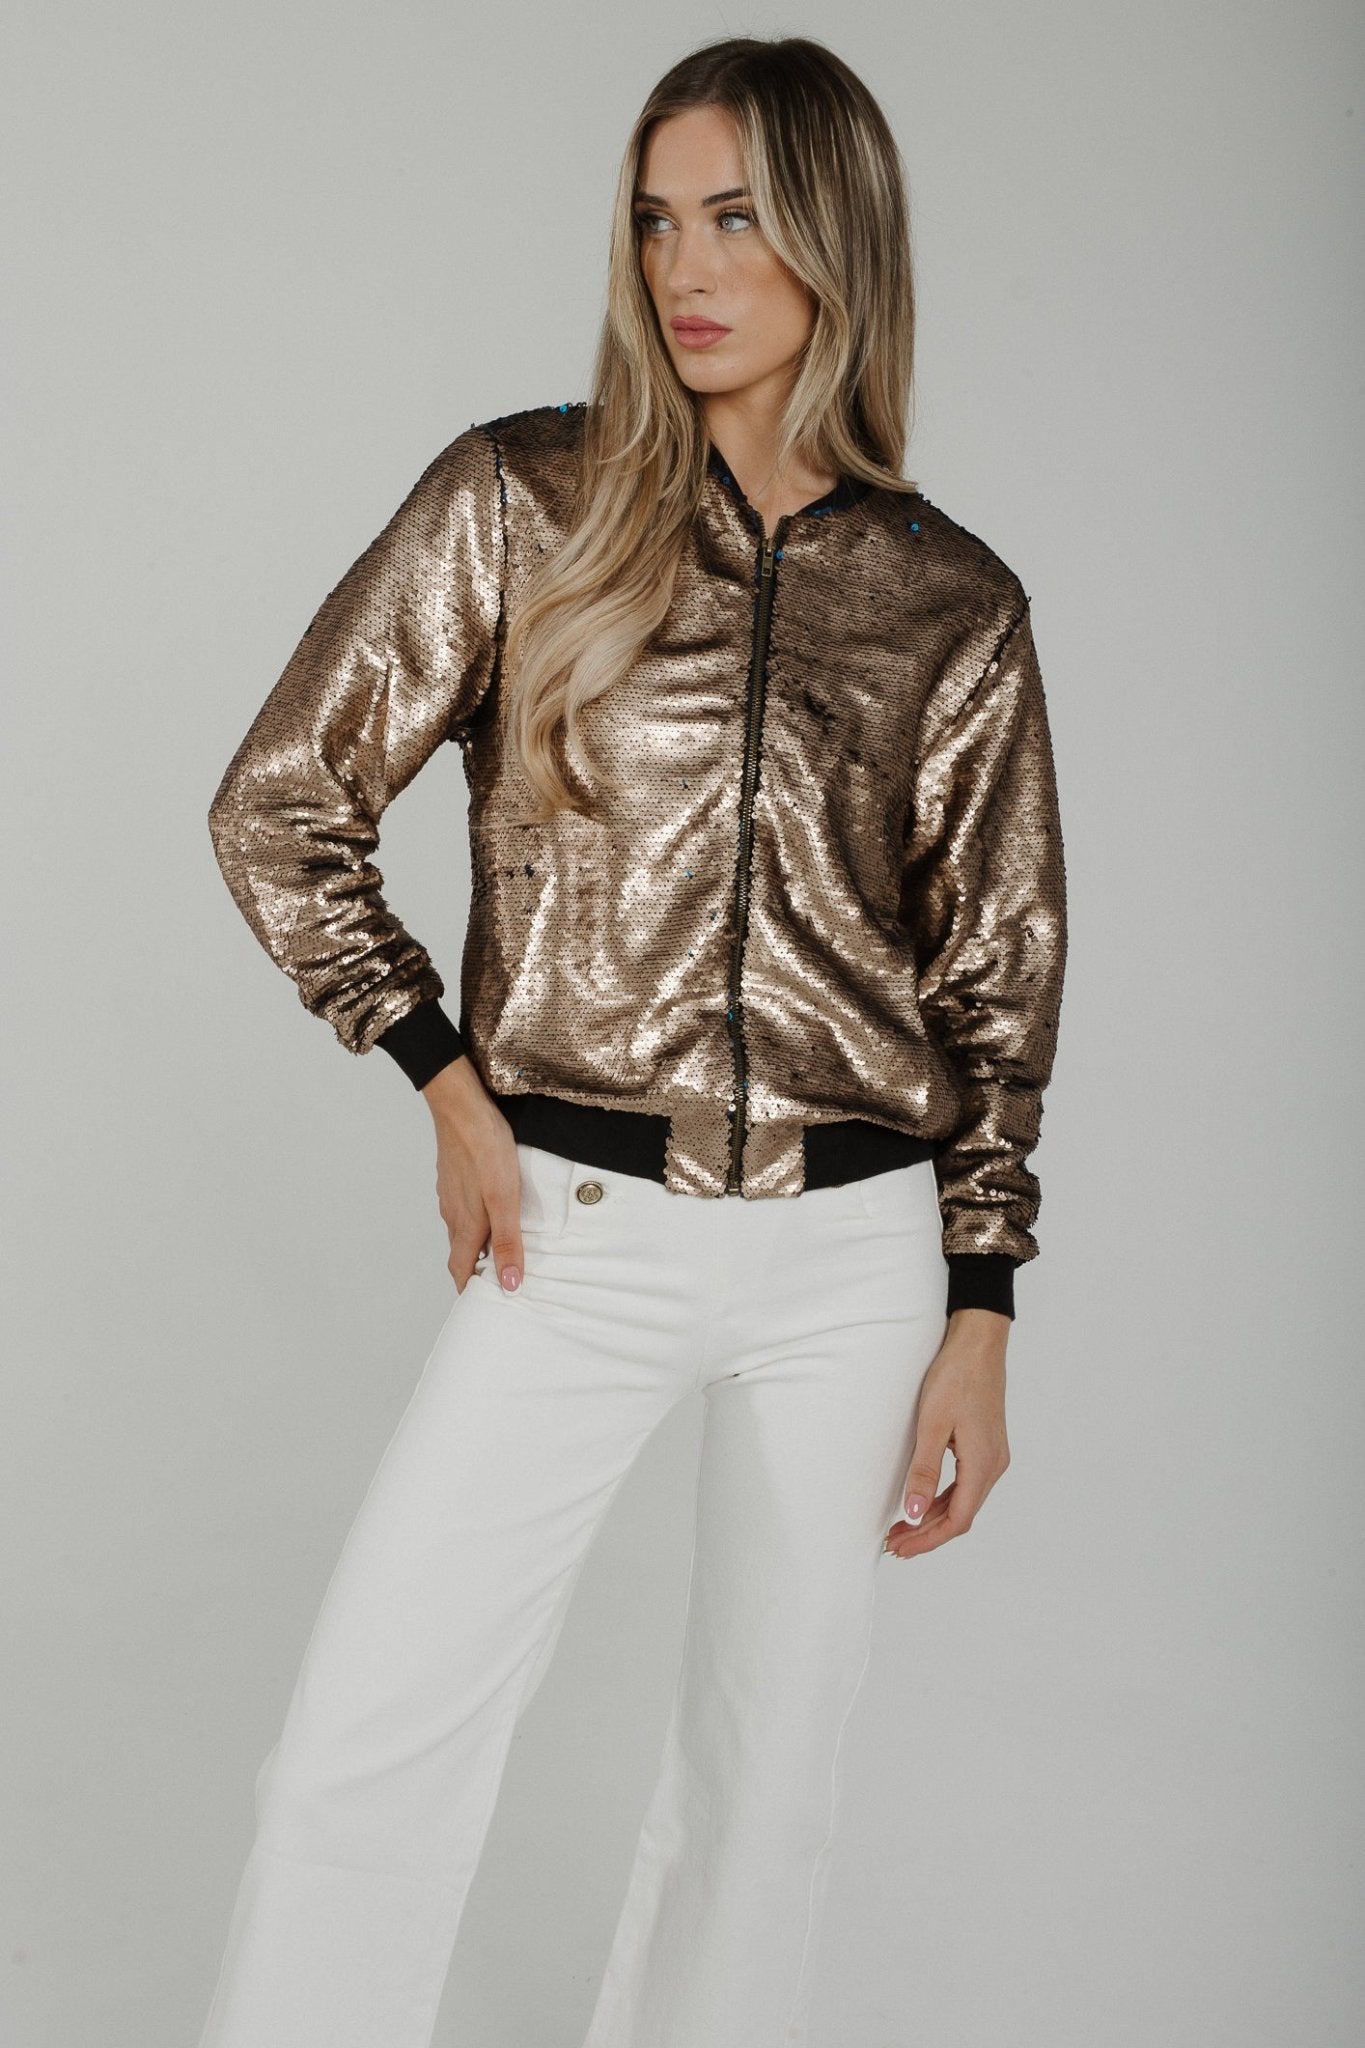 Polly Sequin Jacket In Gold - The Walk in Wardrobe